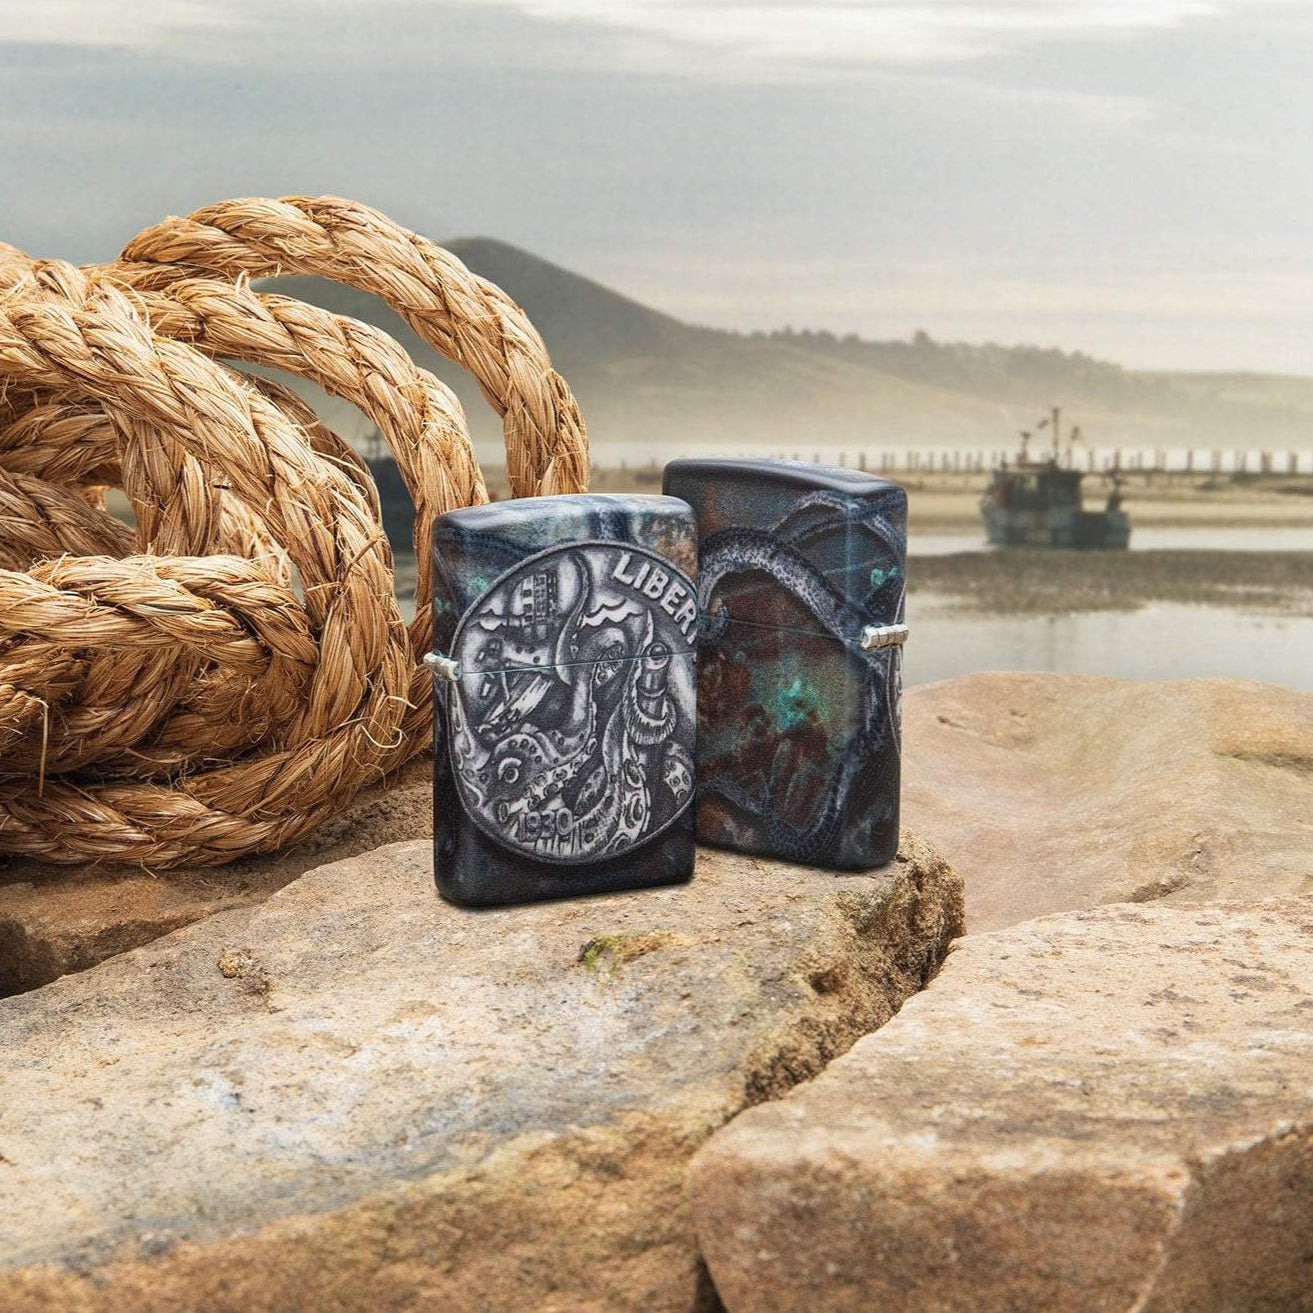 Lifestyle image of Pirate Coin 540 Color Design Windproof Lighter, standing on a rock with rope next to it and a ship in the background. One lighter is showing the front of the design , with the second lighter showing the back of the design.